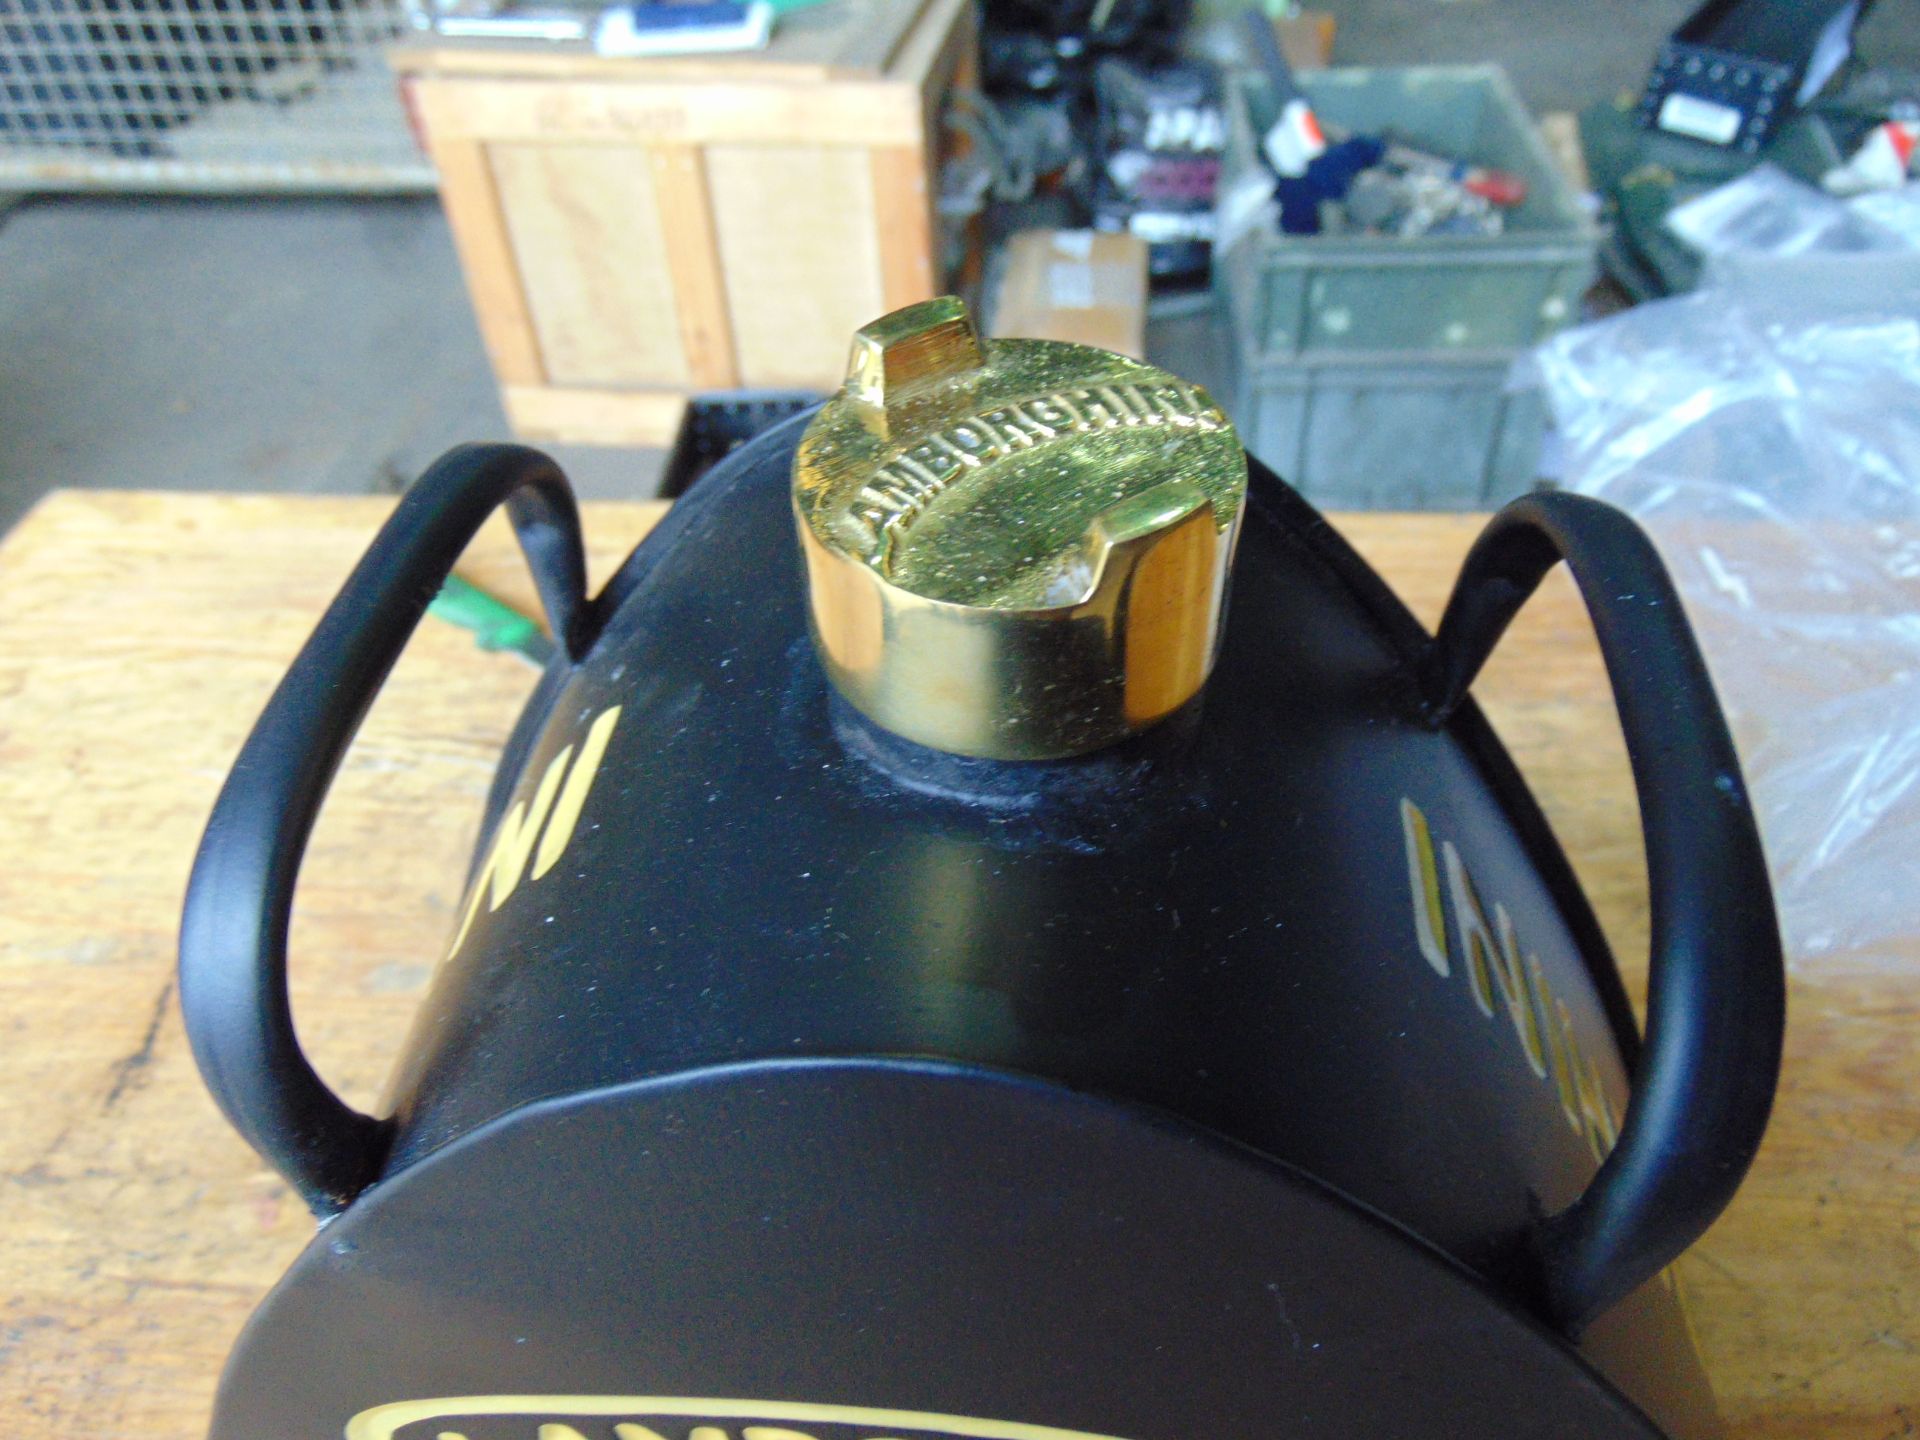 New Lamborghini Hand Painted Fuel/Oil Can with Brass Cap and Handles - Image 3 of 4